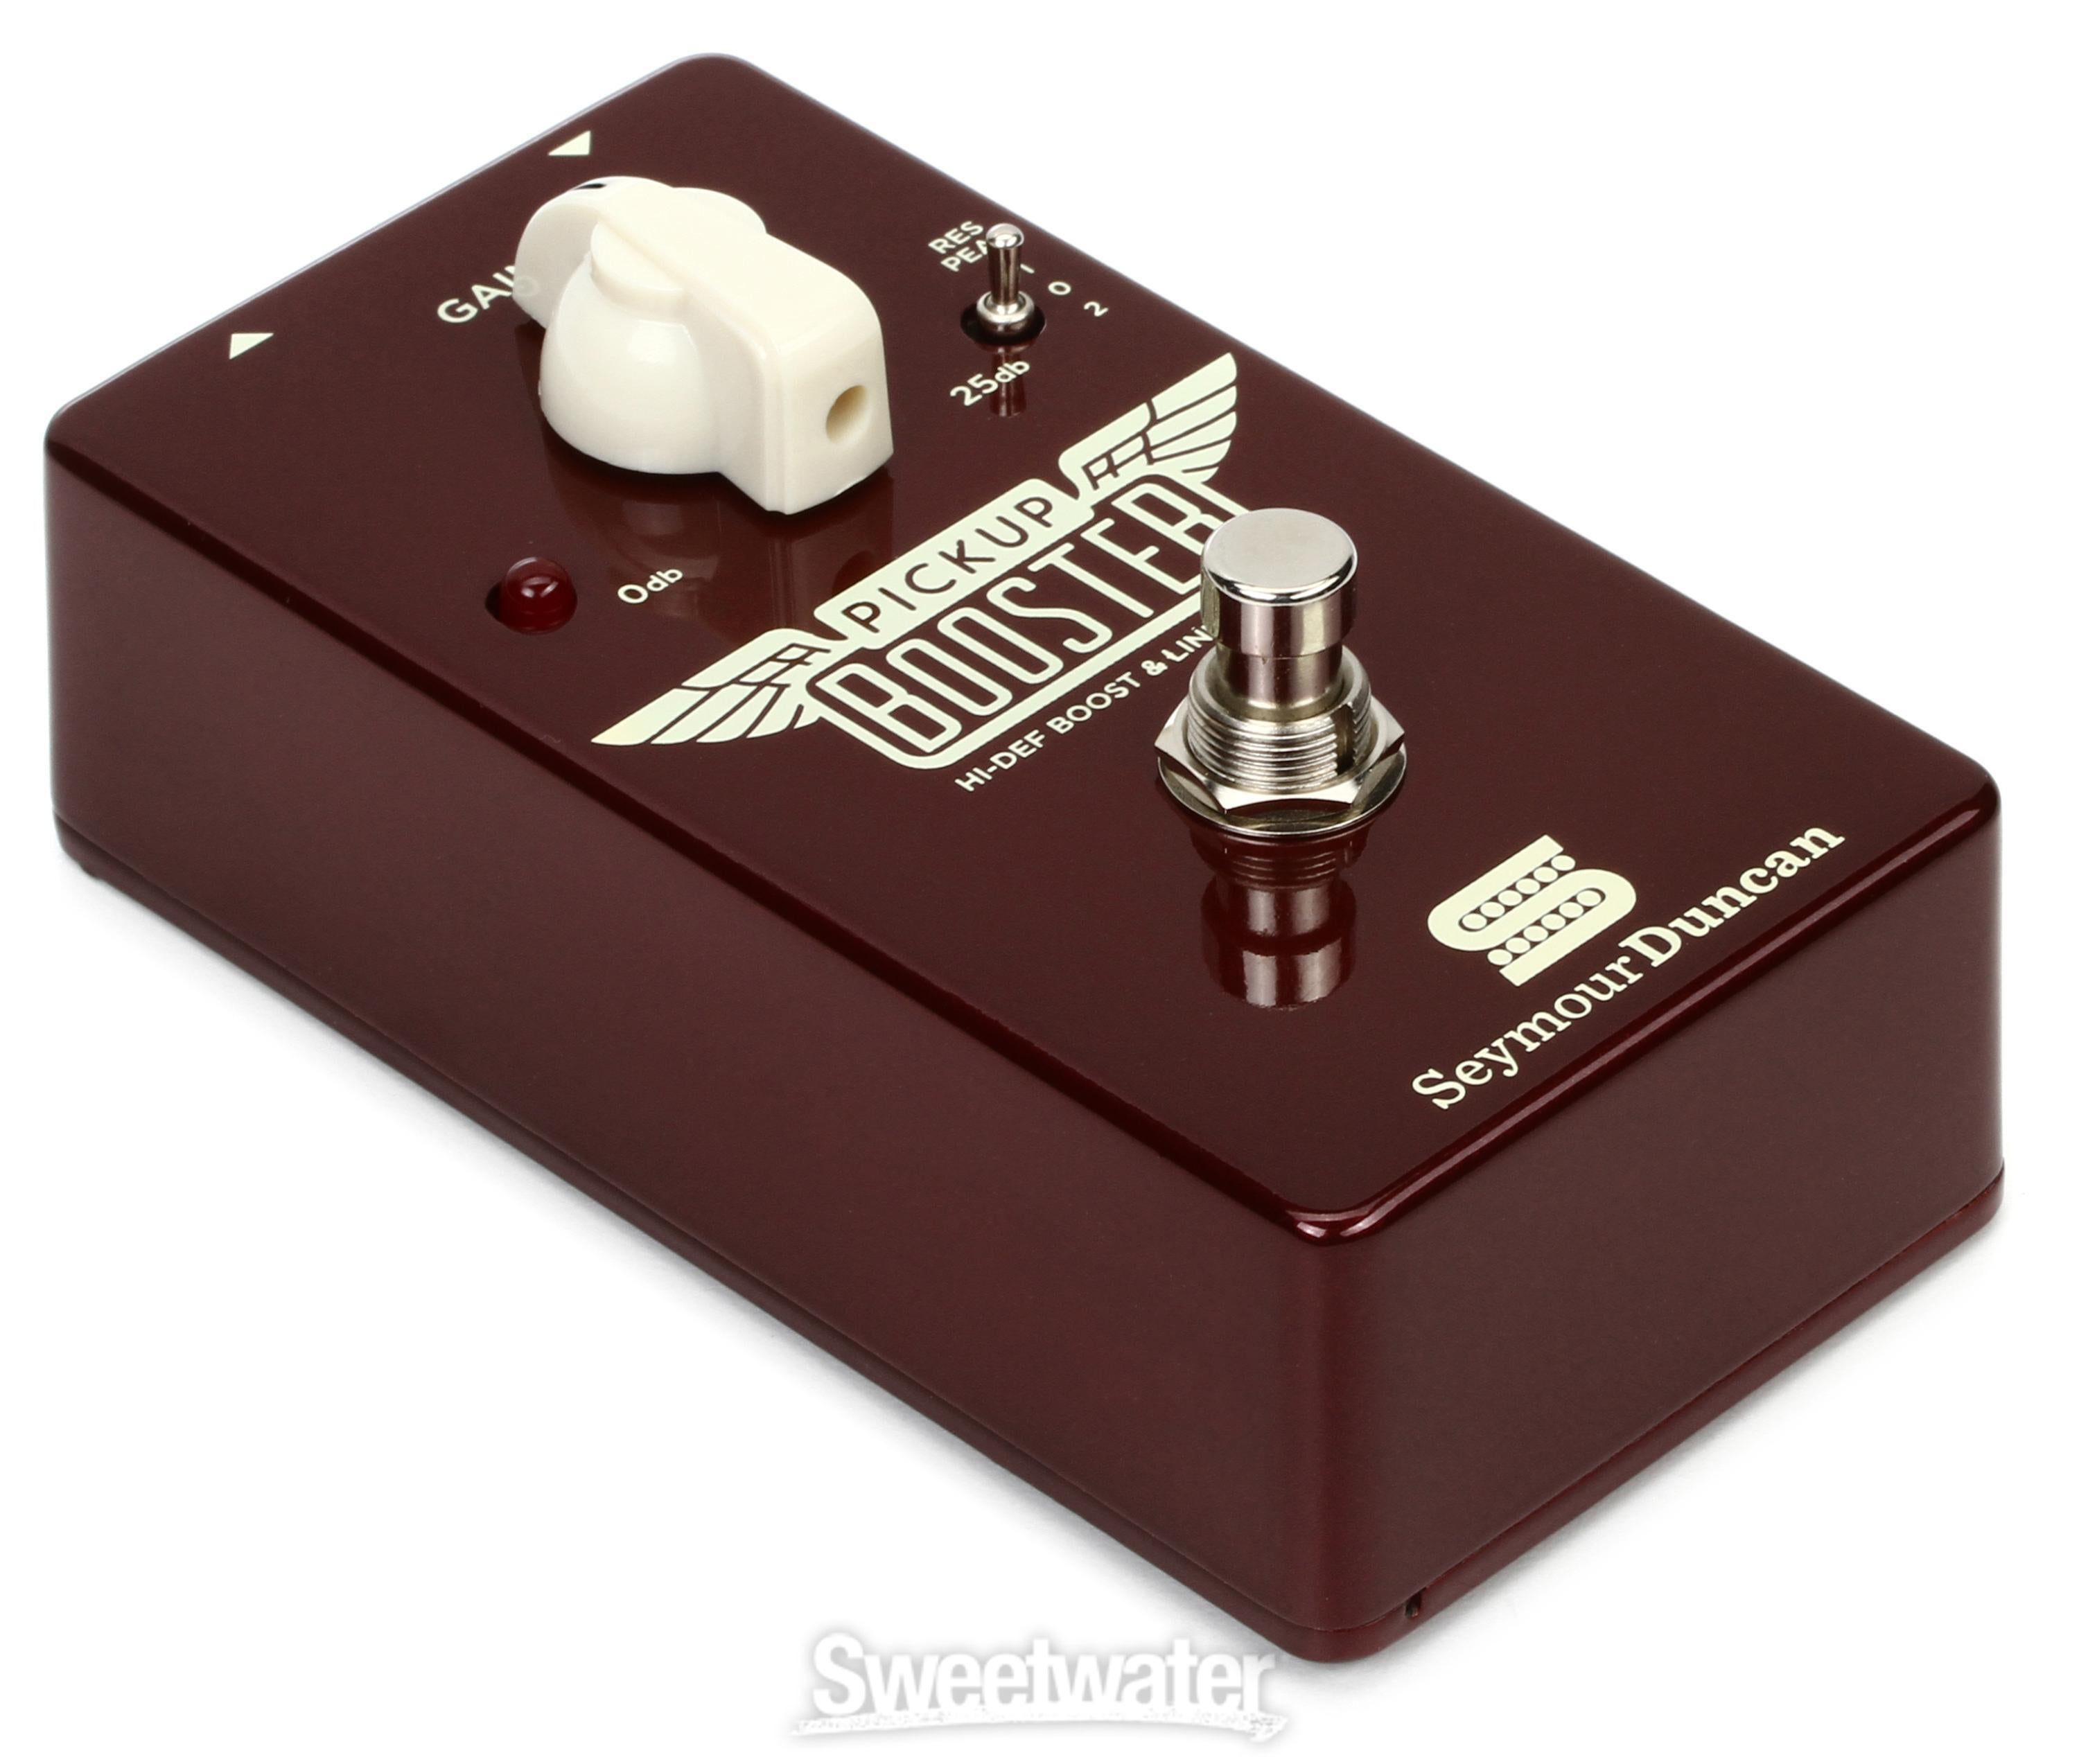 Seymour Duncan Pickup Booster 25dB Boost Pedal Reviews | Sweetwater